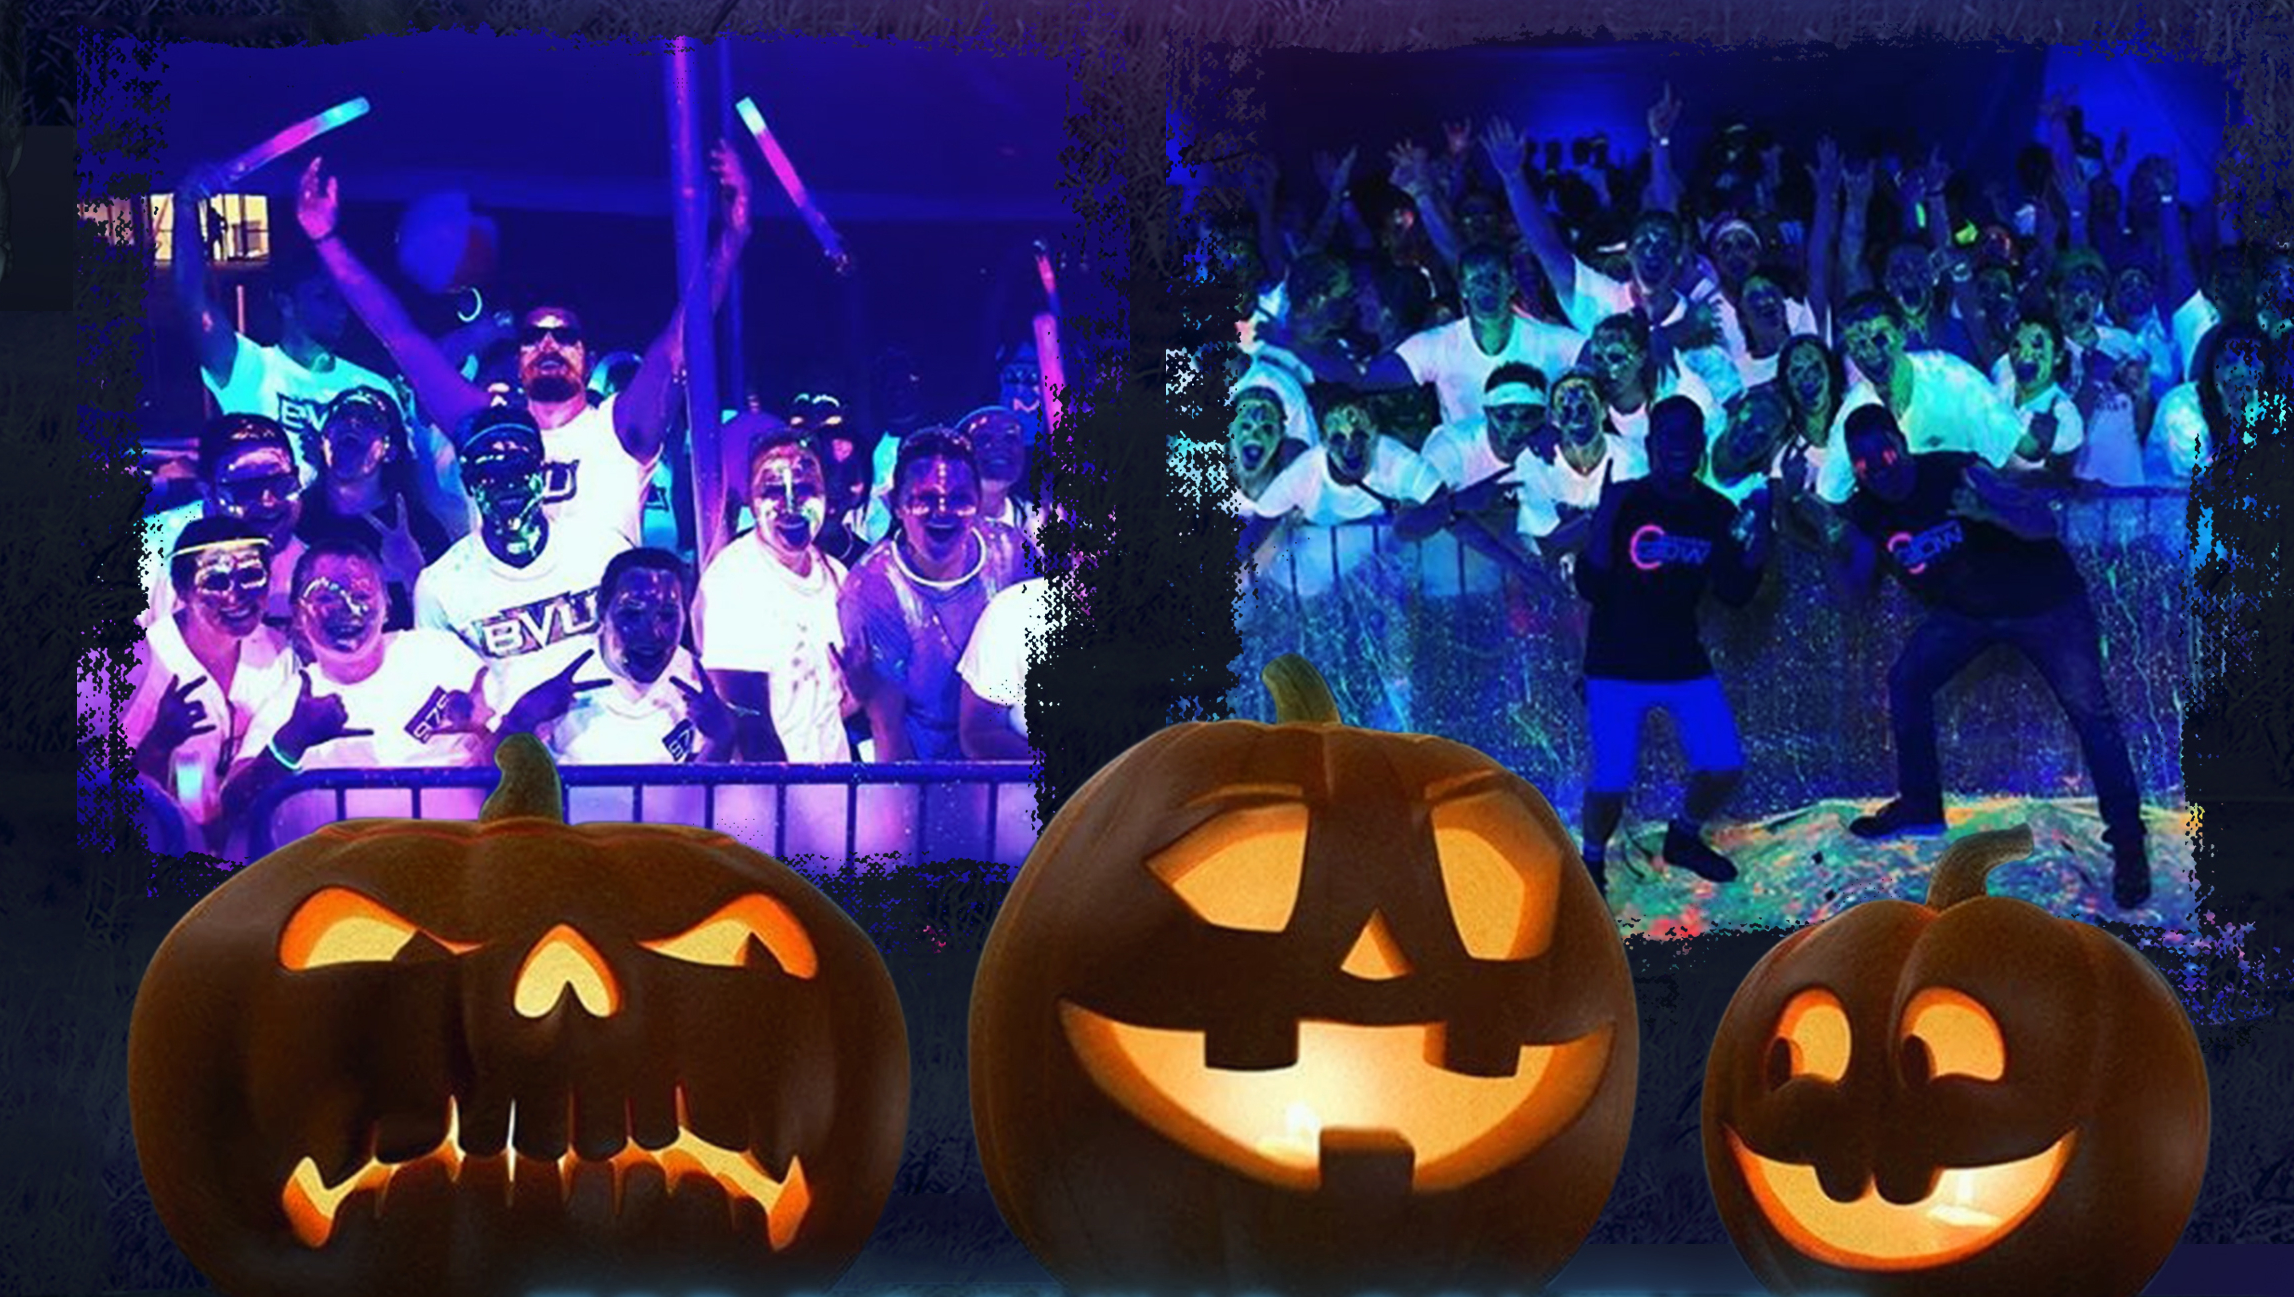 Ghouls, Ghosts and Glow by Operation Glow thumbnail. 3 pumpkins front and center with glow party images in the background.